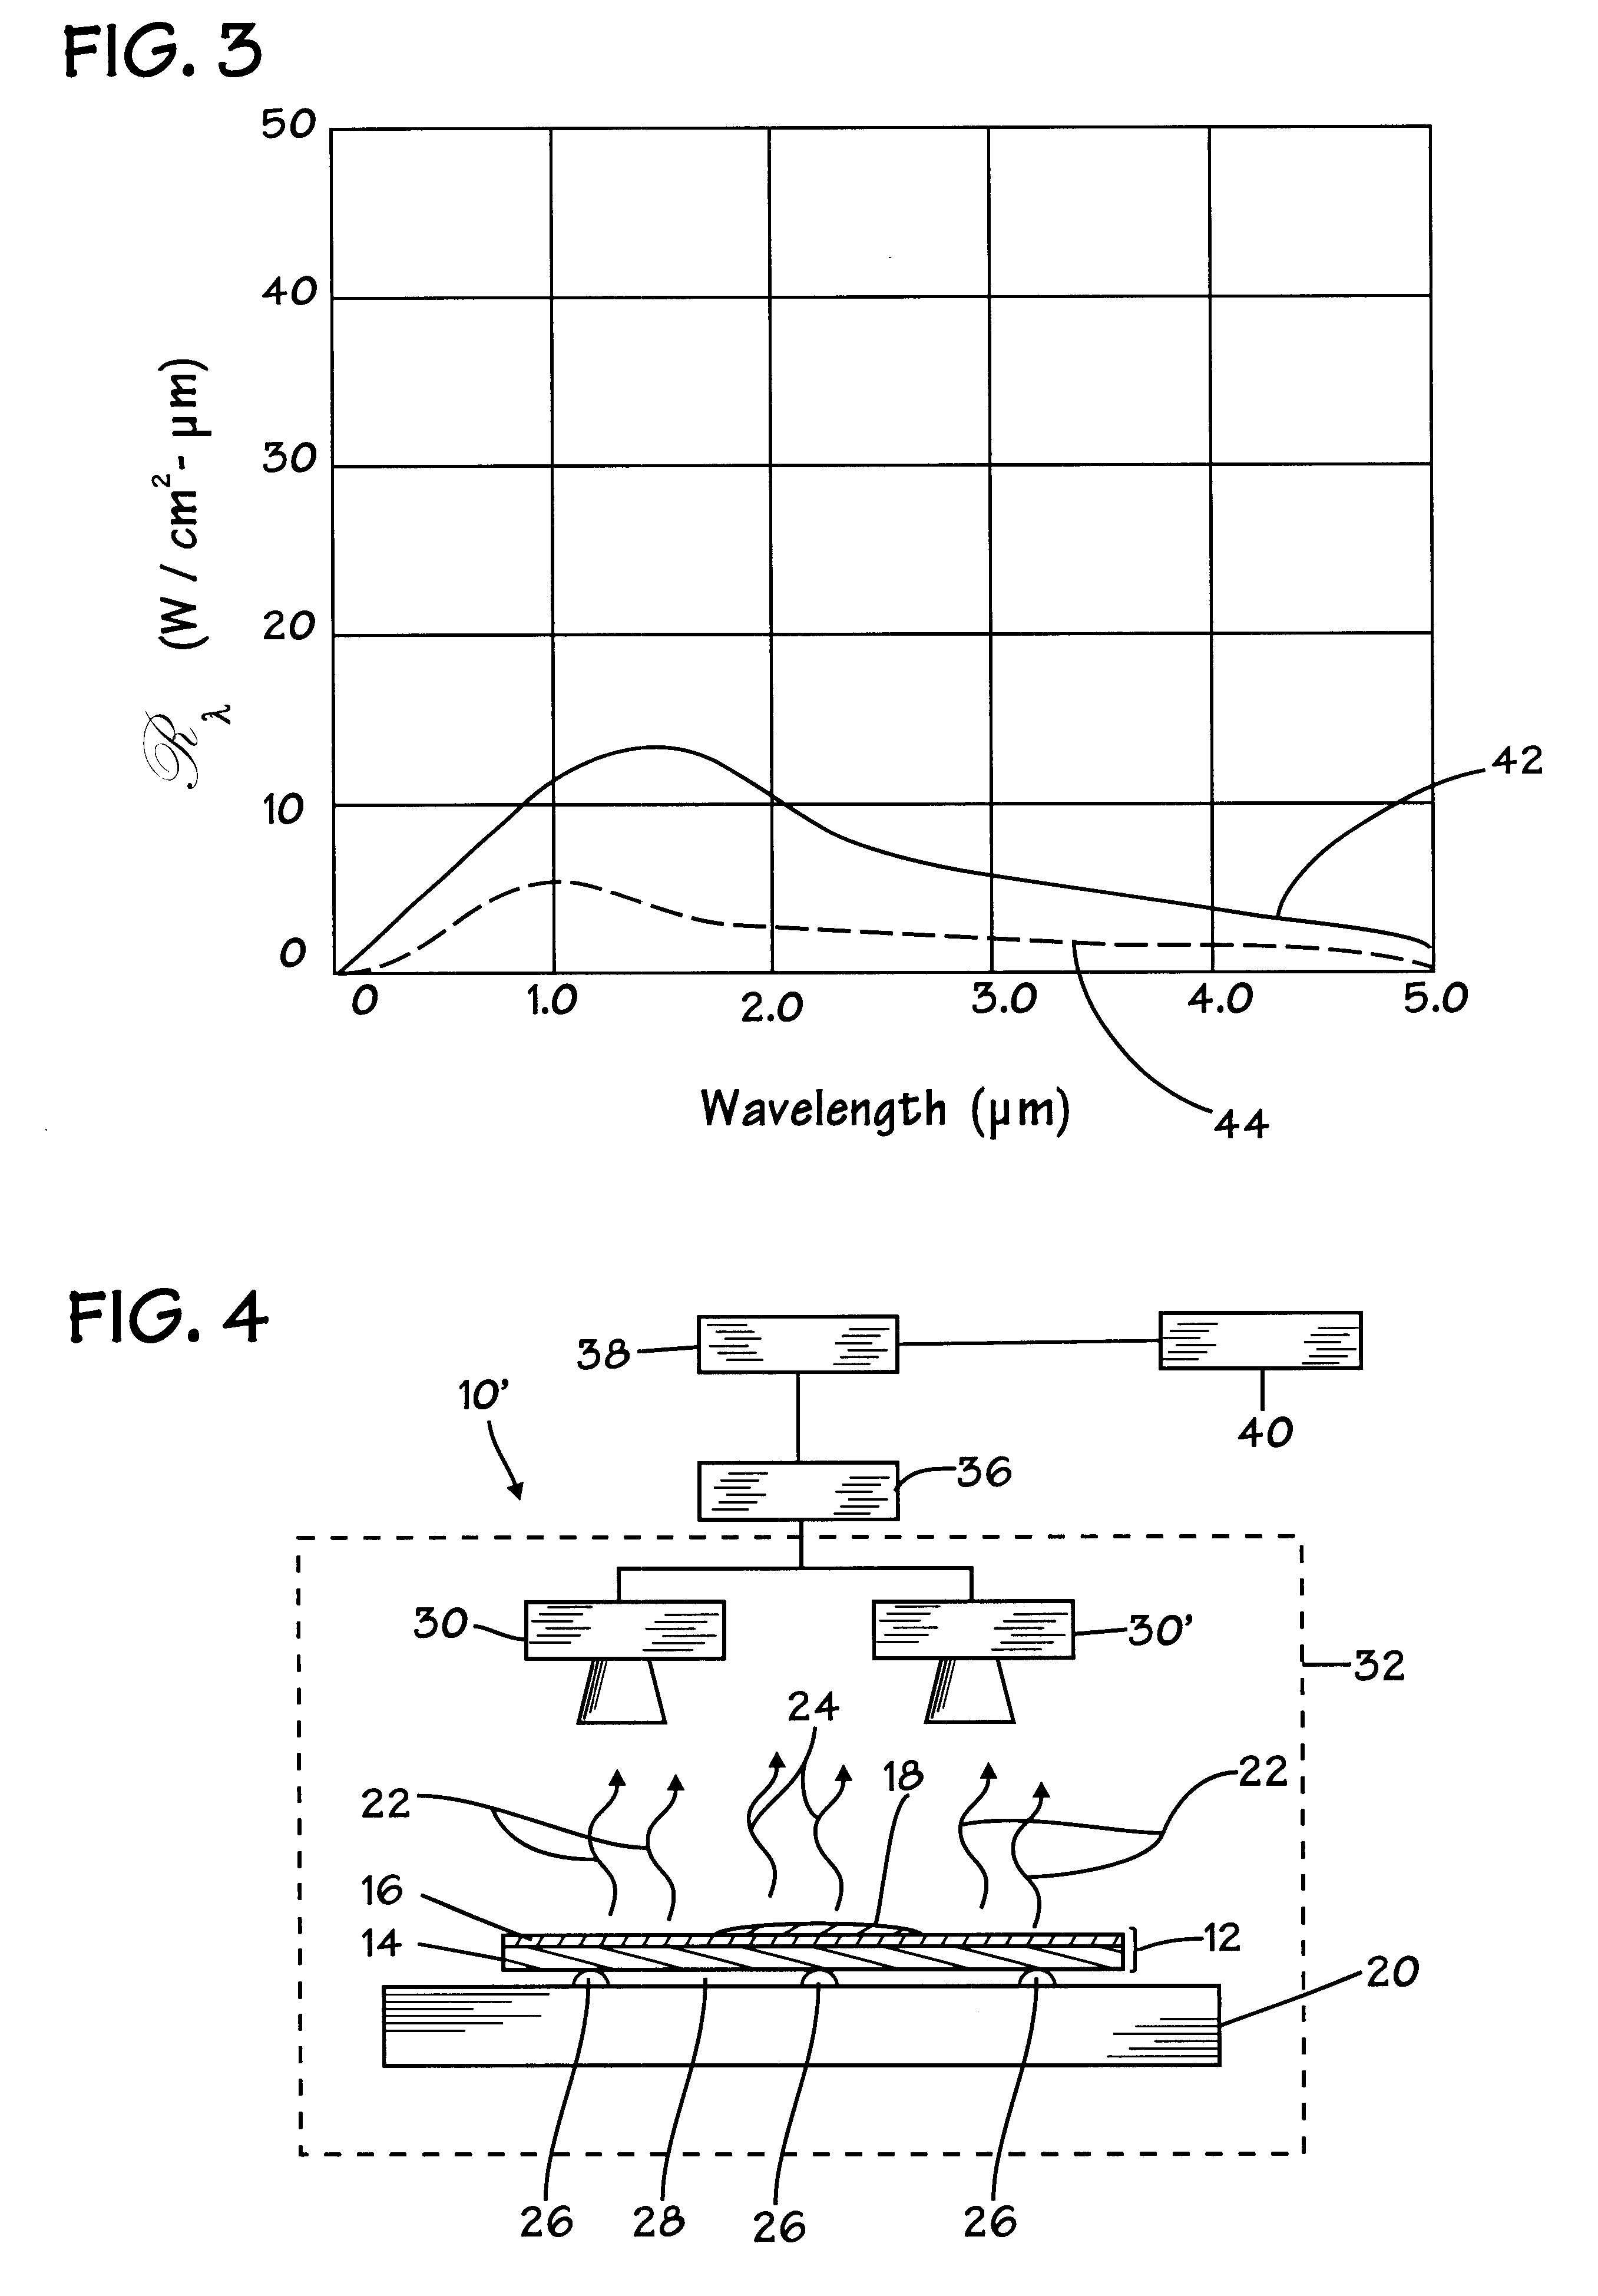 Infrared inspection for determining residual films on semiconductor devices